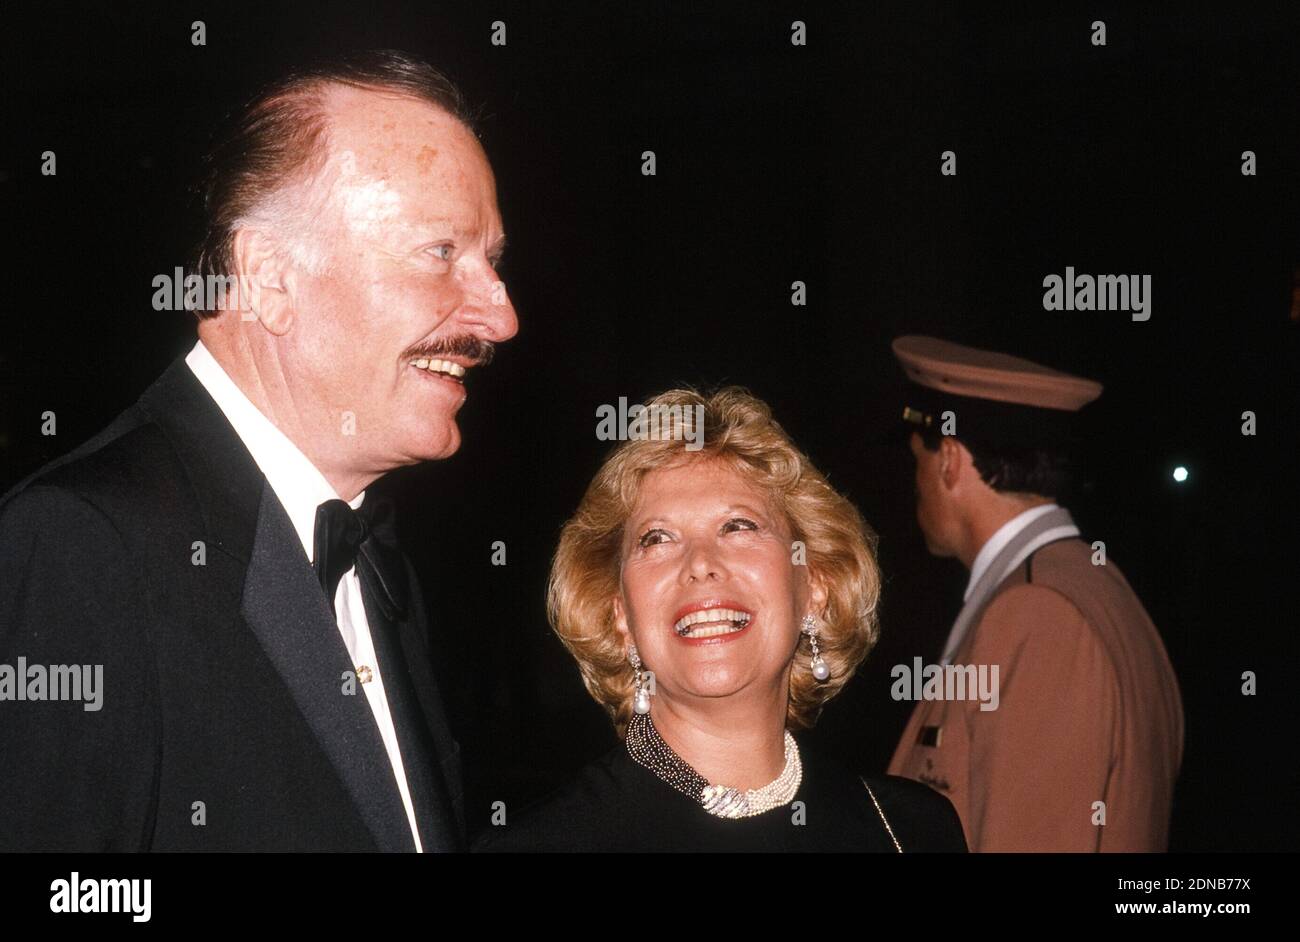 Dinah Shore at the Carousel of Hope Benefit in Beverly Hills, CA, October 26th, 1990 / File Reference # 34000-1316PLTHA Stock Photo